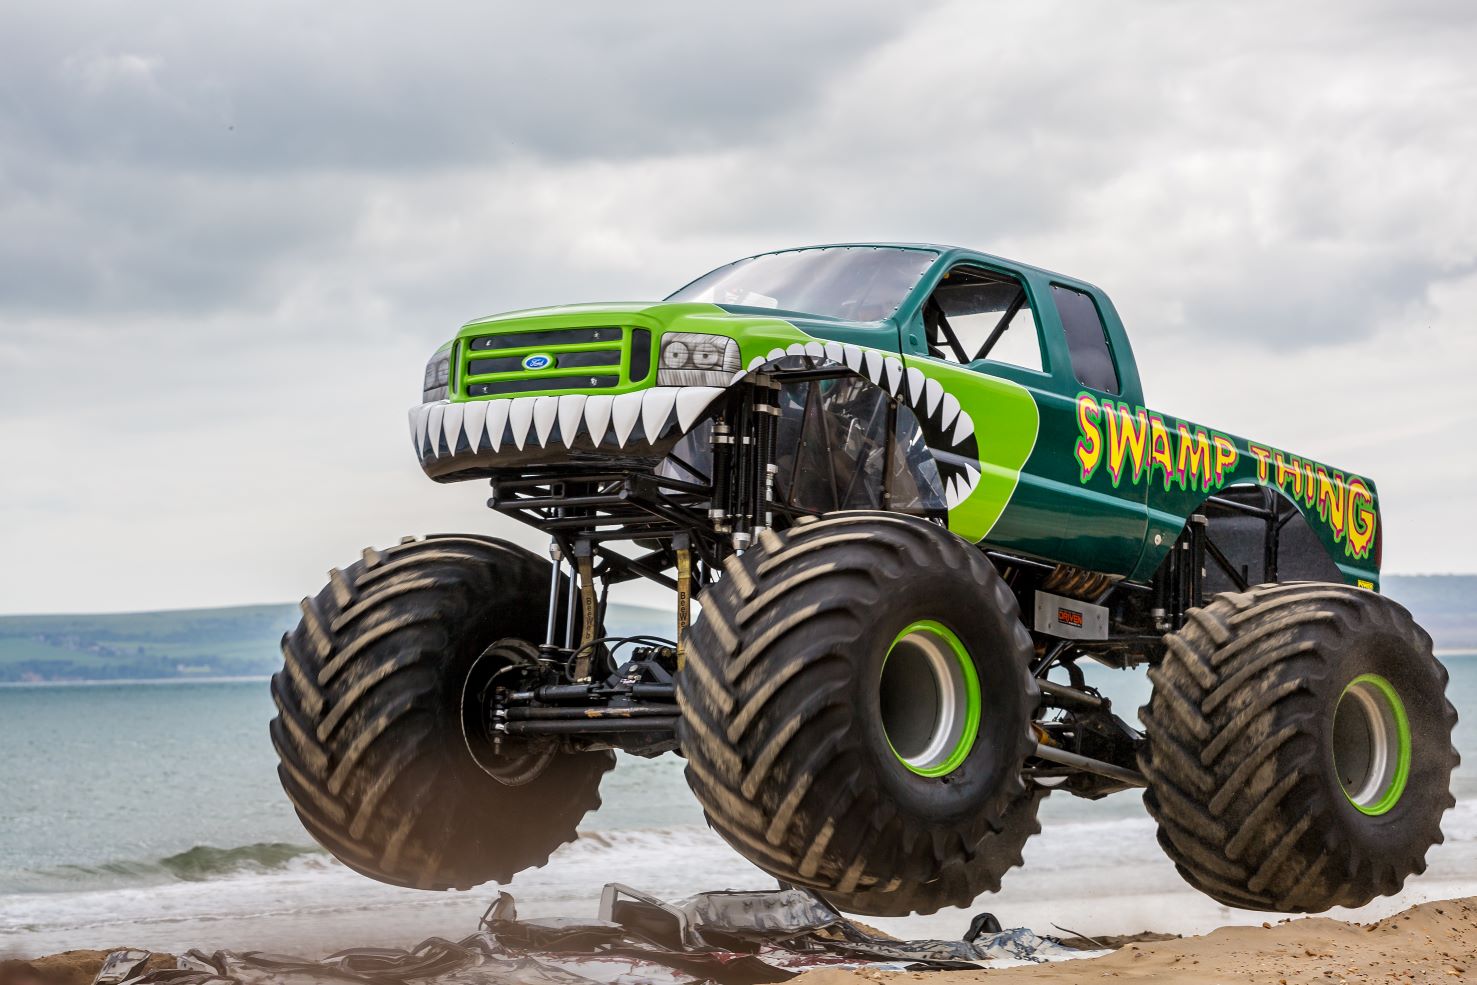 How Do You Become a Monster Truck Driver? Drive, man!